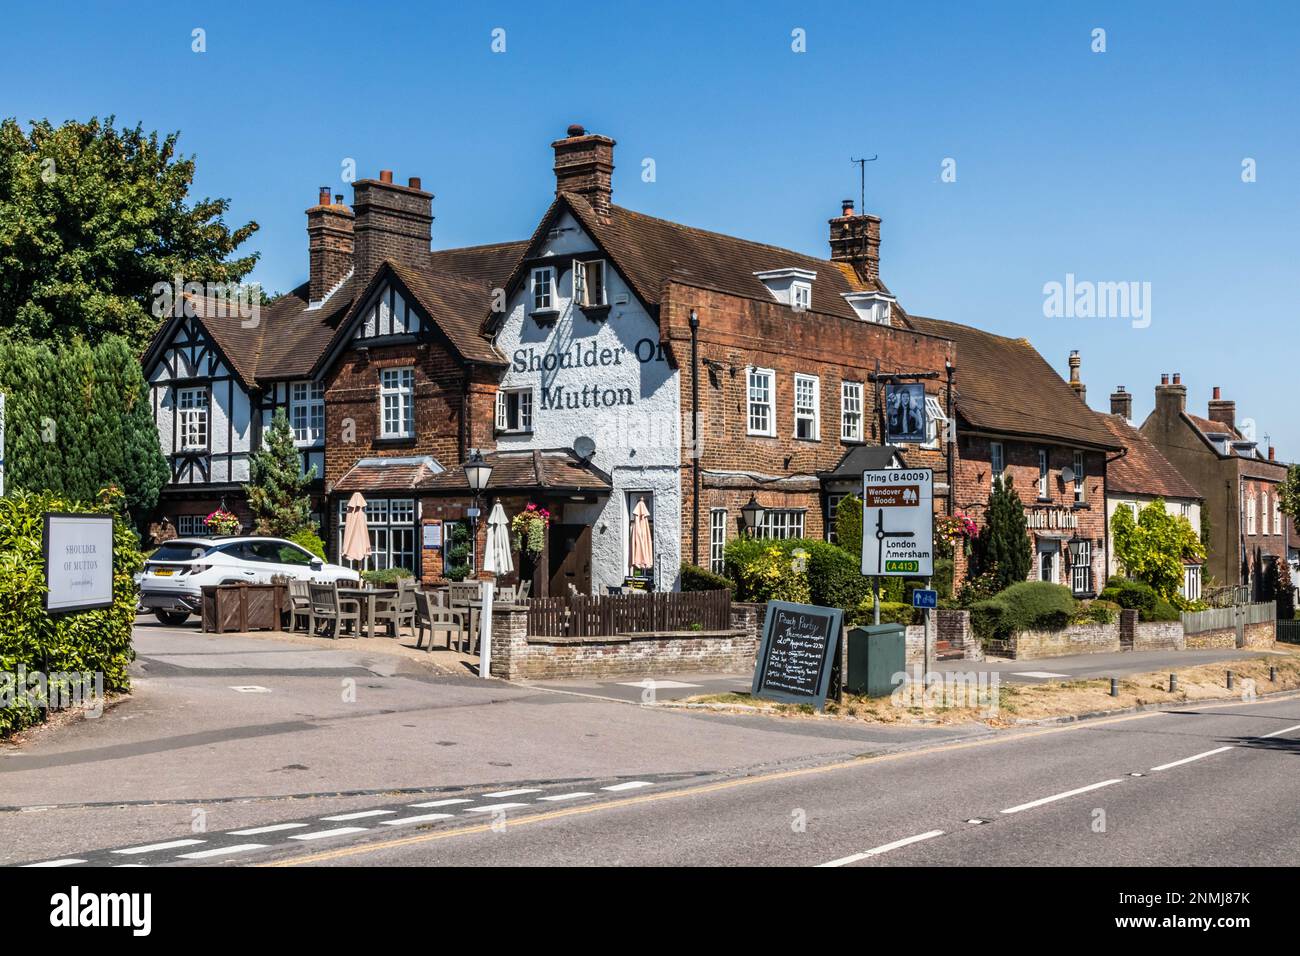 The Shoulder of Mutton pub, Wendover, Buckinghamshire Stock Photo